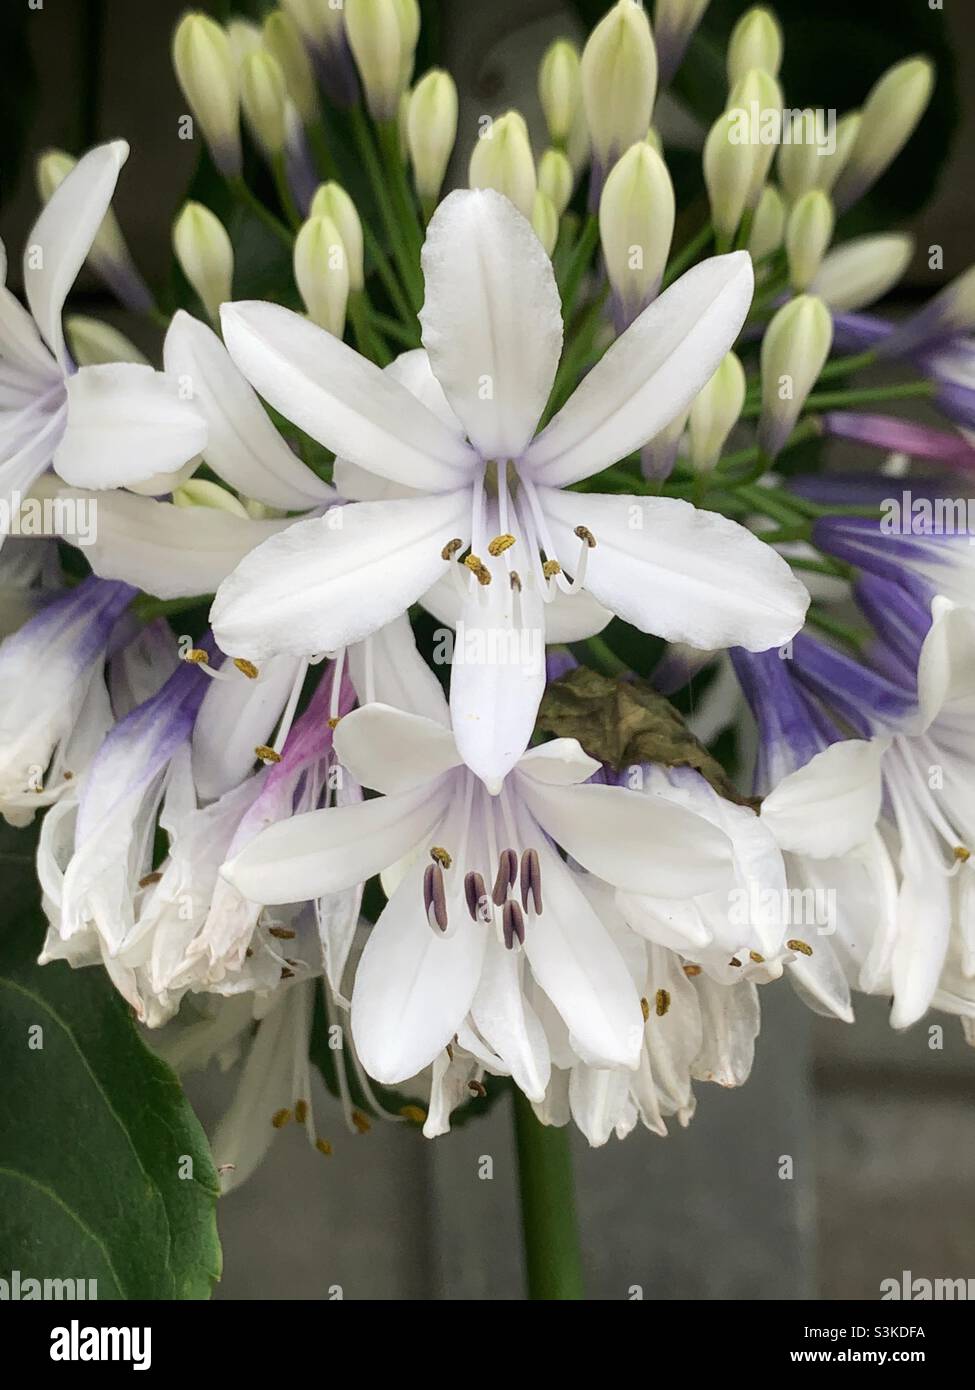 White and mauve flowers and pseudo-umbel of a Agapanthus orientalis at the Sunshine Coast, Queensland, Australia. Stock Photo